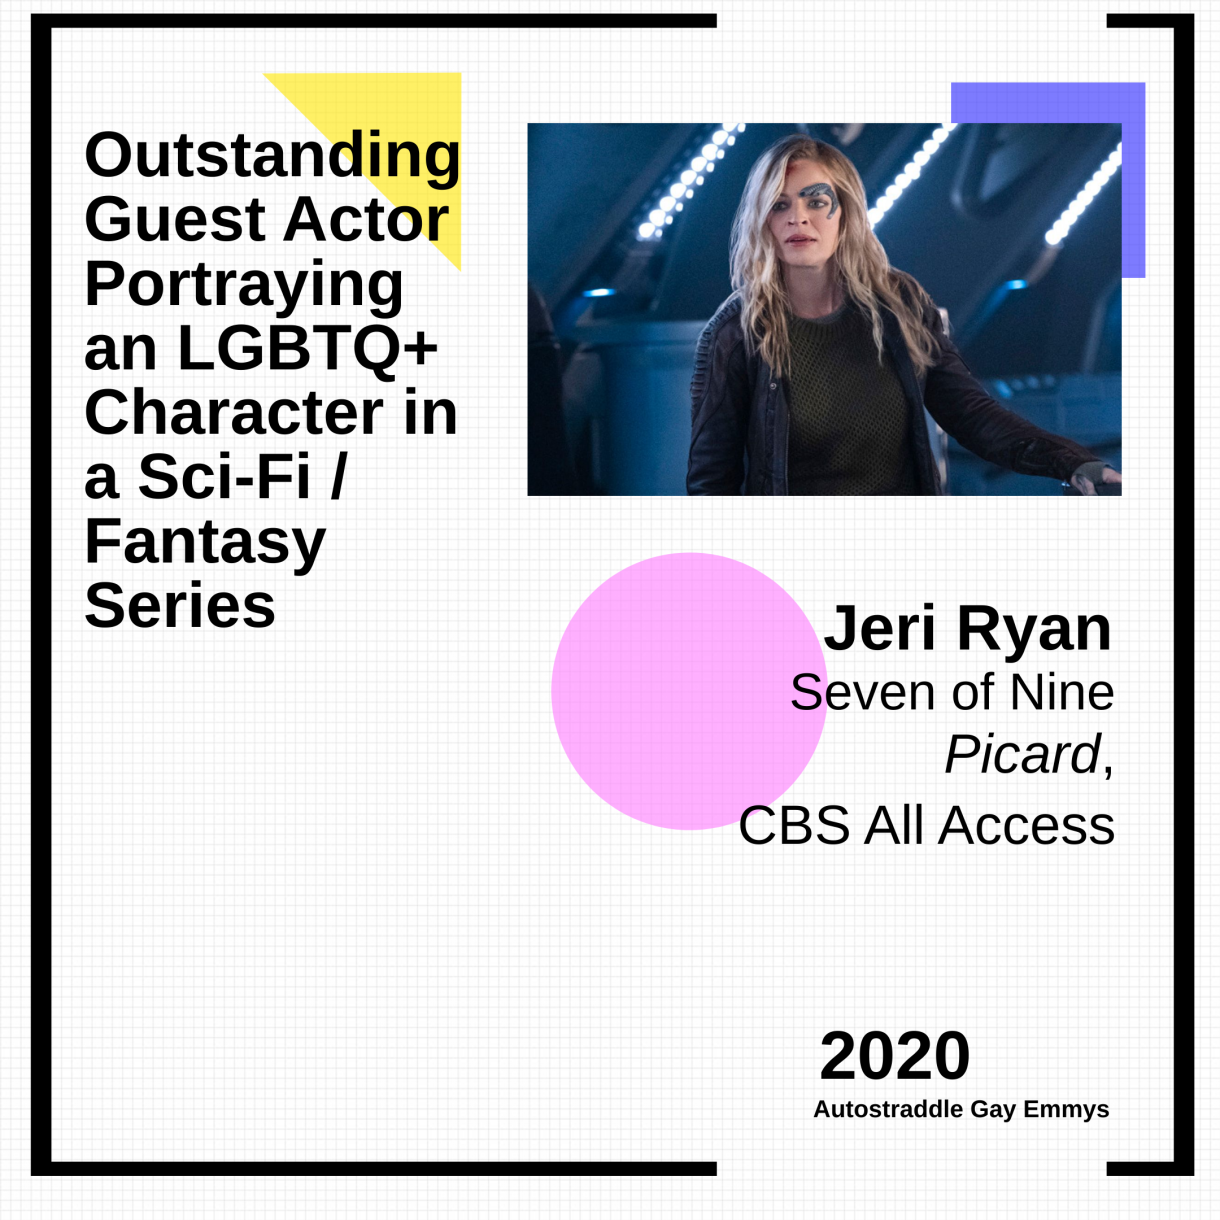 Outstanding Guest Actor Playing an LGBTQ+ Character in a Sci-Fi/Fantasy Series: Jeri Ryan as Seven of Nine, Picard (CBS All Access)